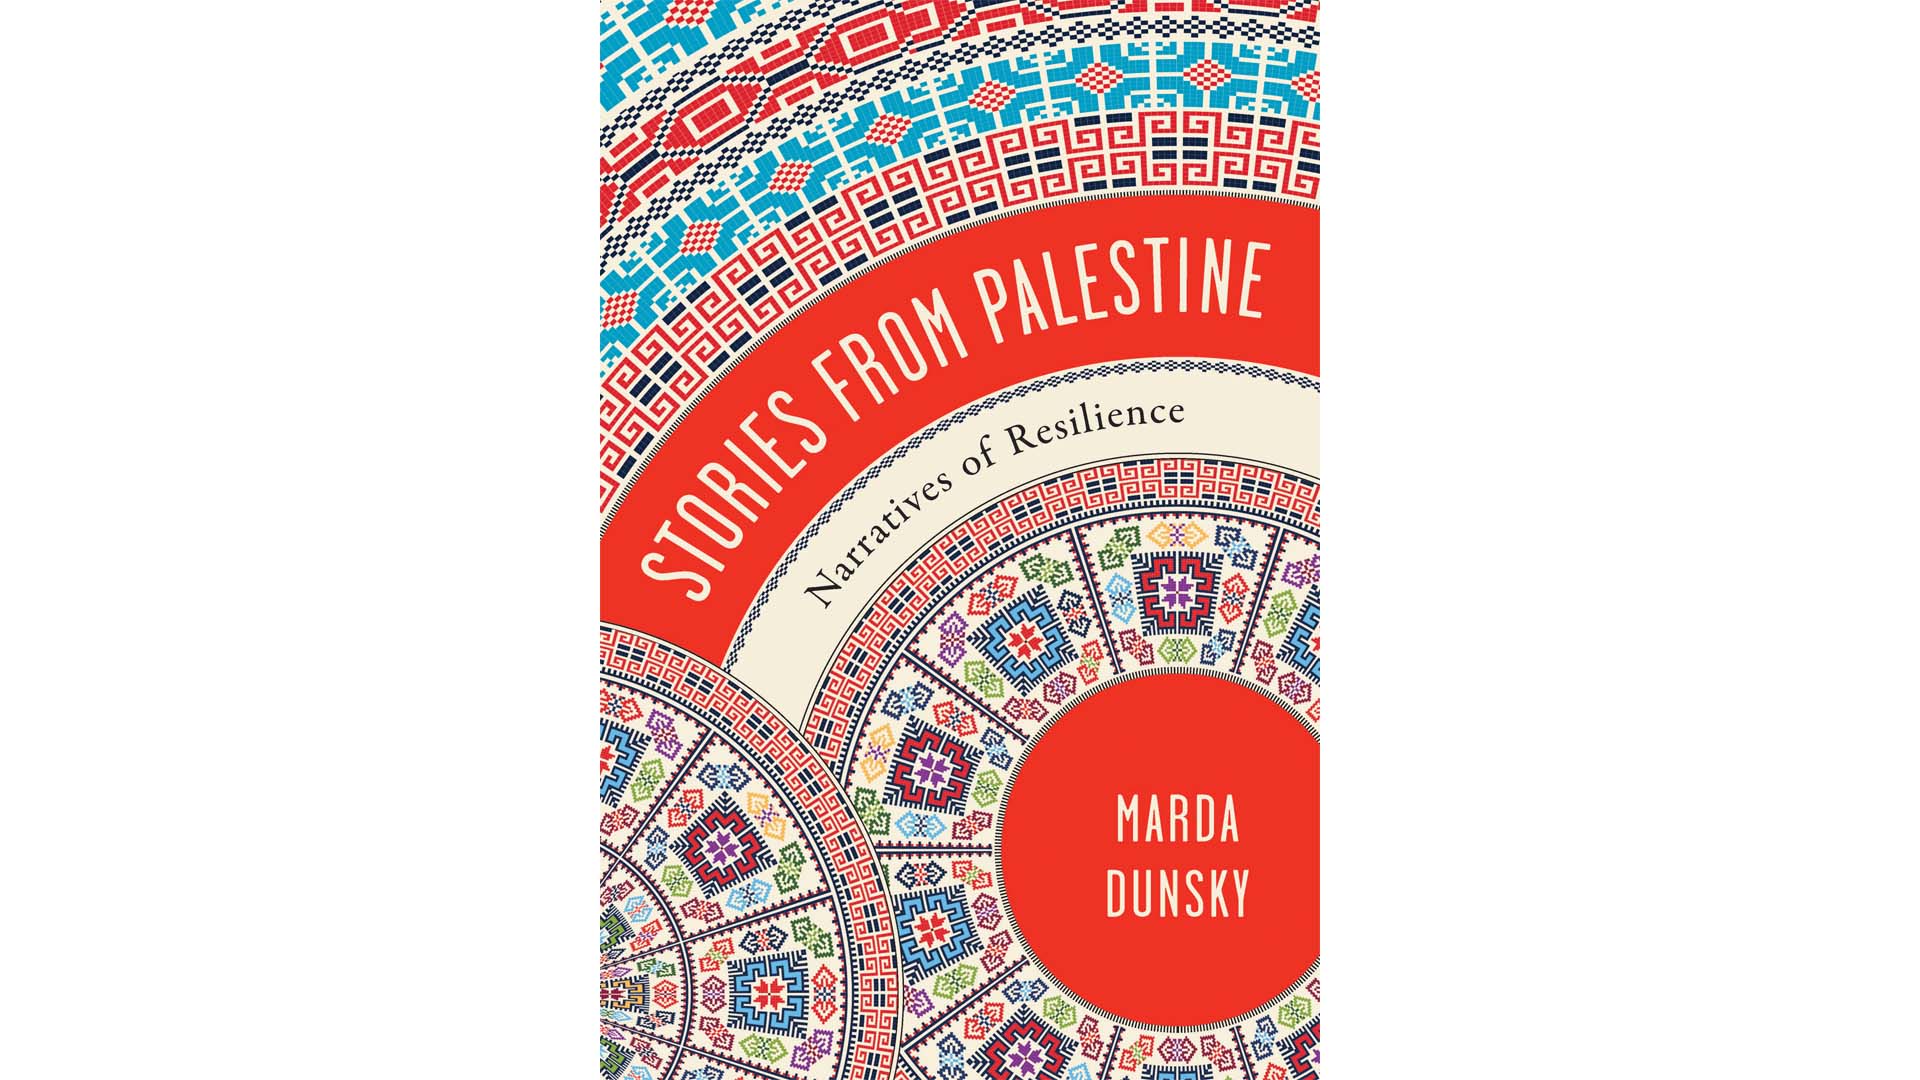 Dunsky's most recent book, Stories from Palestine: Narratives of Resilience, focuses on productive and creative pursuits of Palestinians living in the West Bank, east Jerusalem, and the Gaza Strip. 